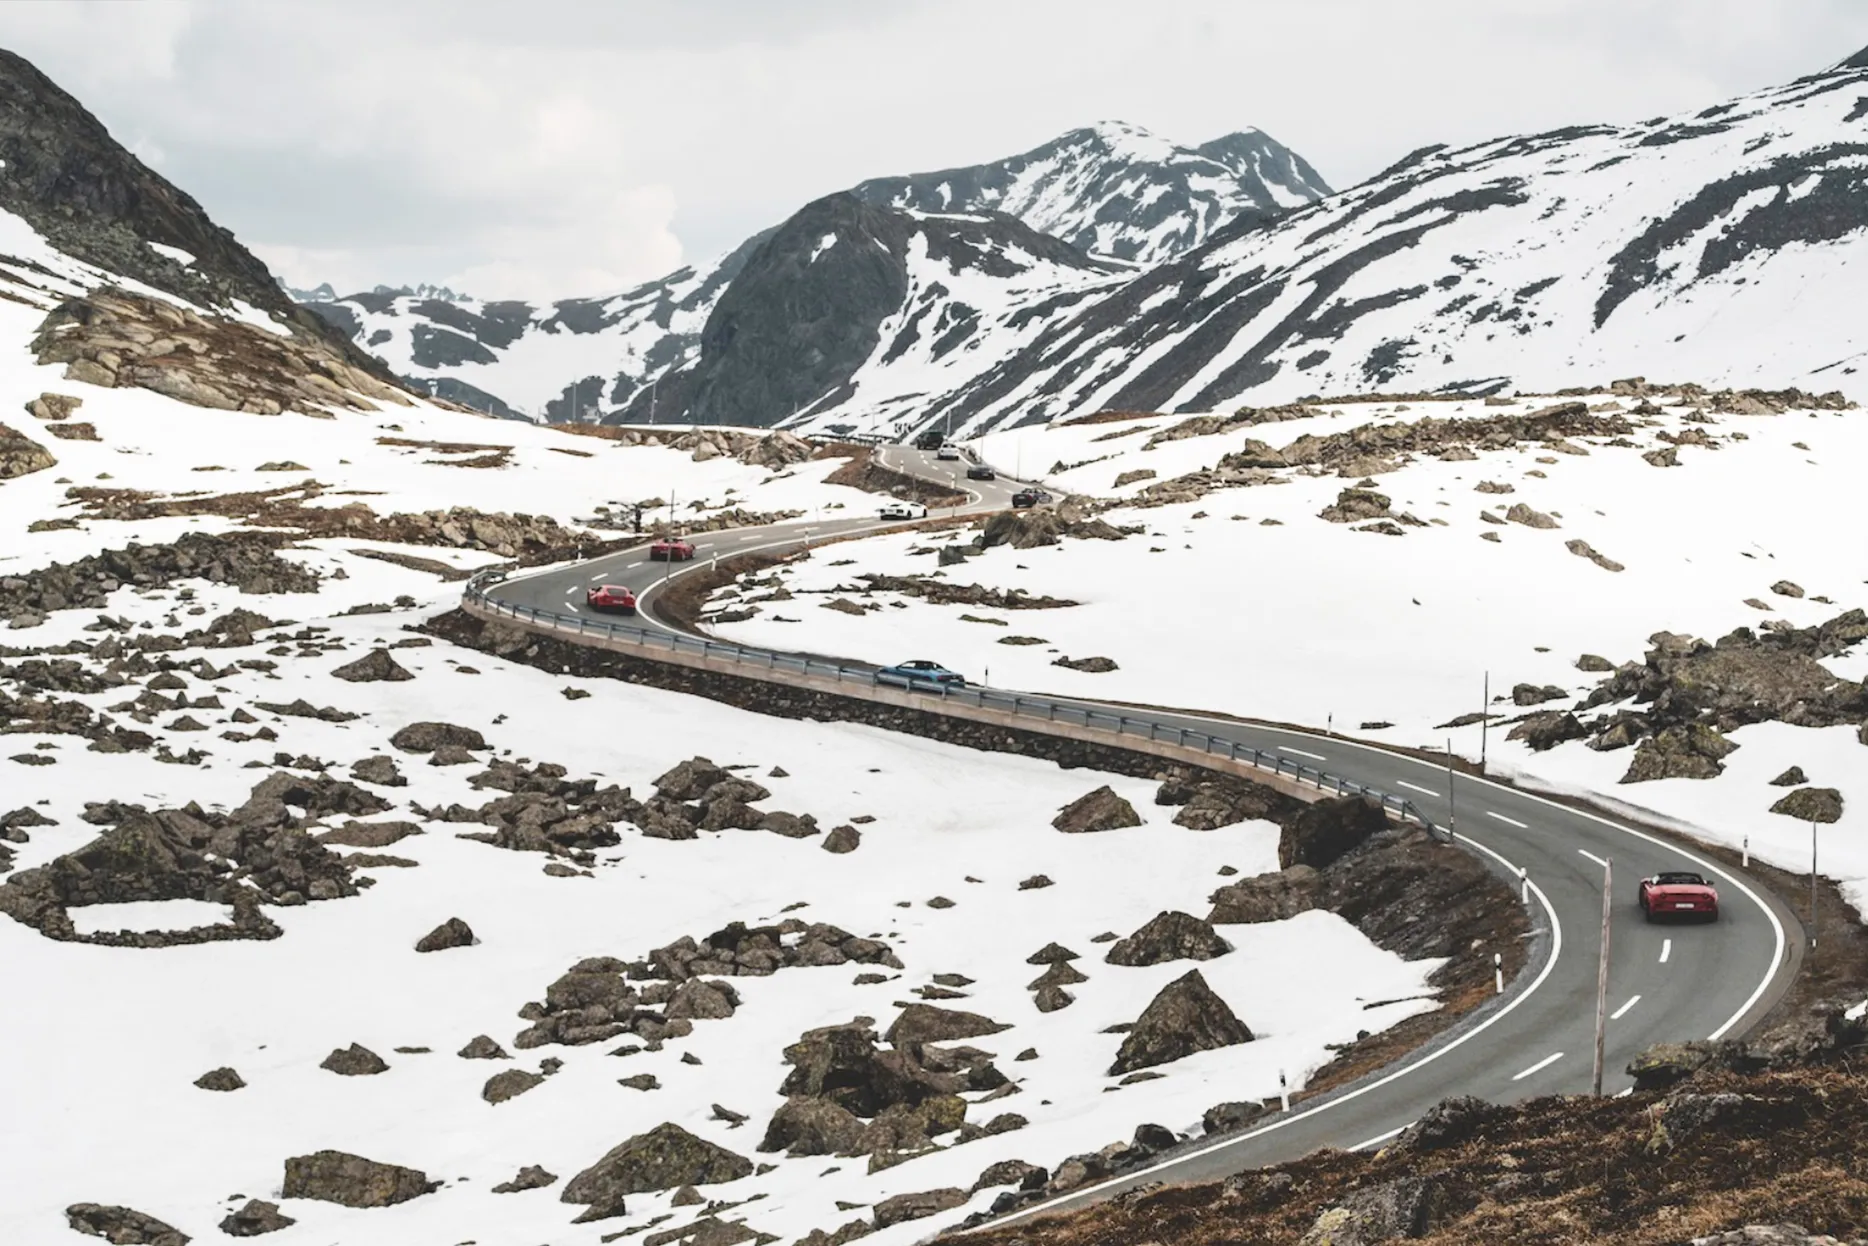 supercars climb the snow-capped Grimsel Pass in Switzerland